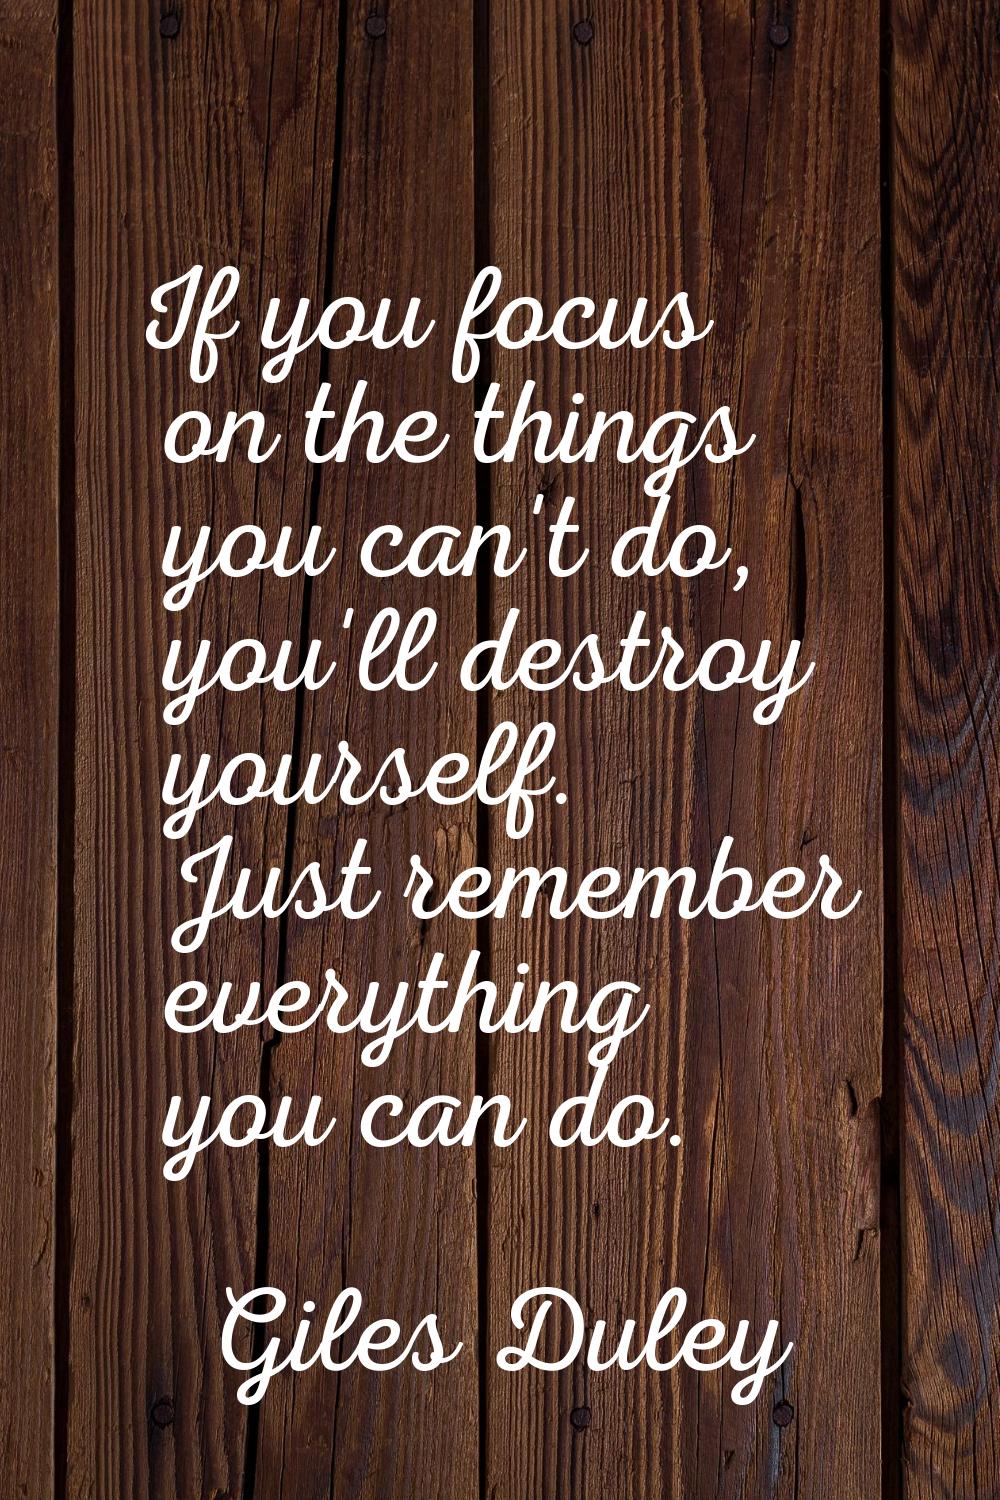 If you focus on the things you can't do, you'll destroy yourself. Just remember everything you can 